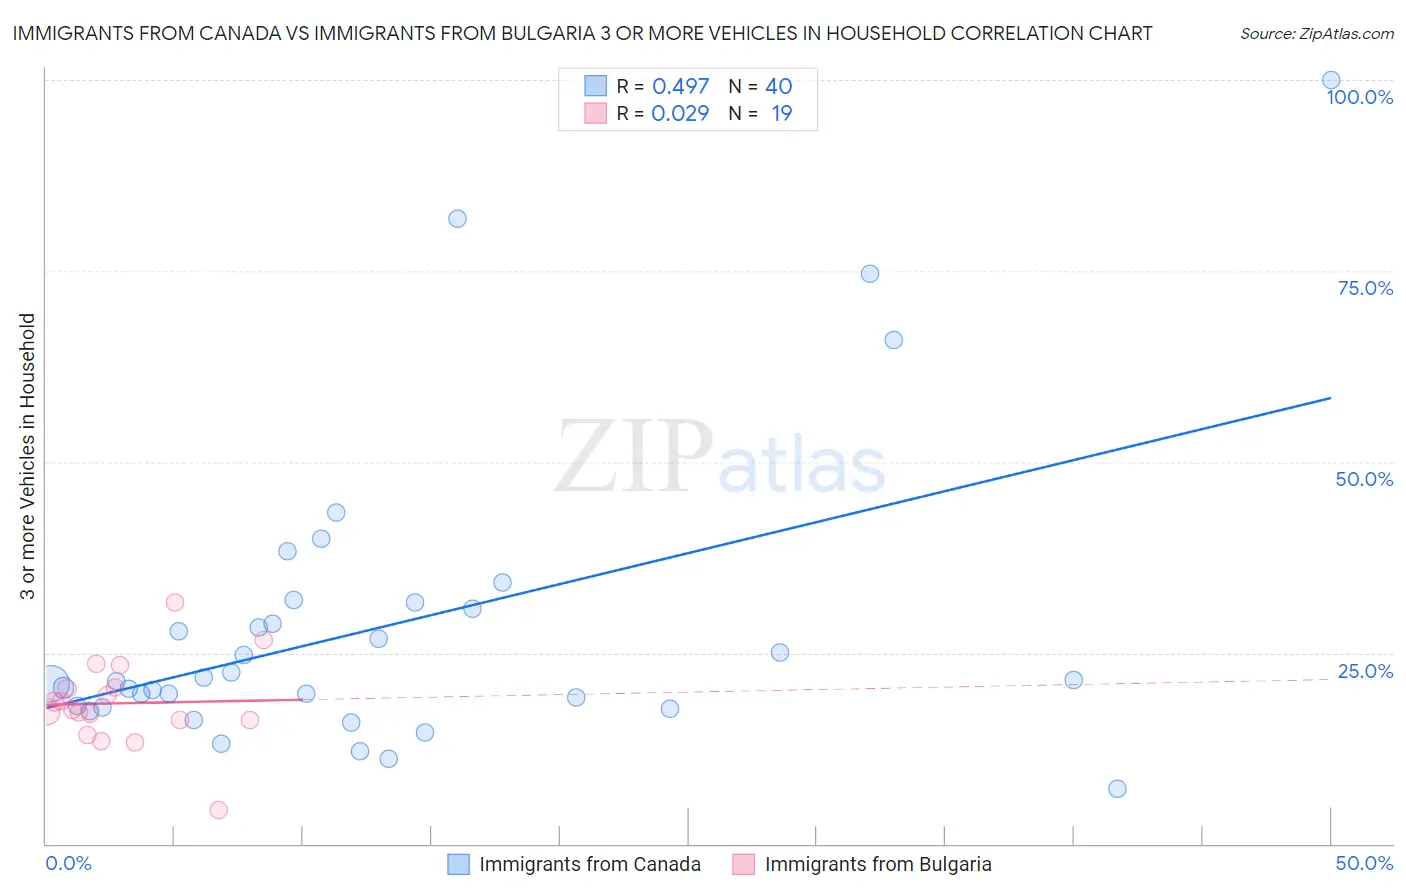 Immigrants from Canada vs Immigrants from Bulgaria 3 or more Vehicles in Household